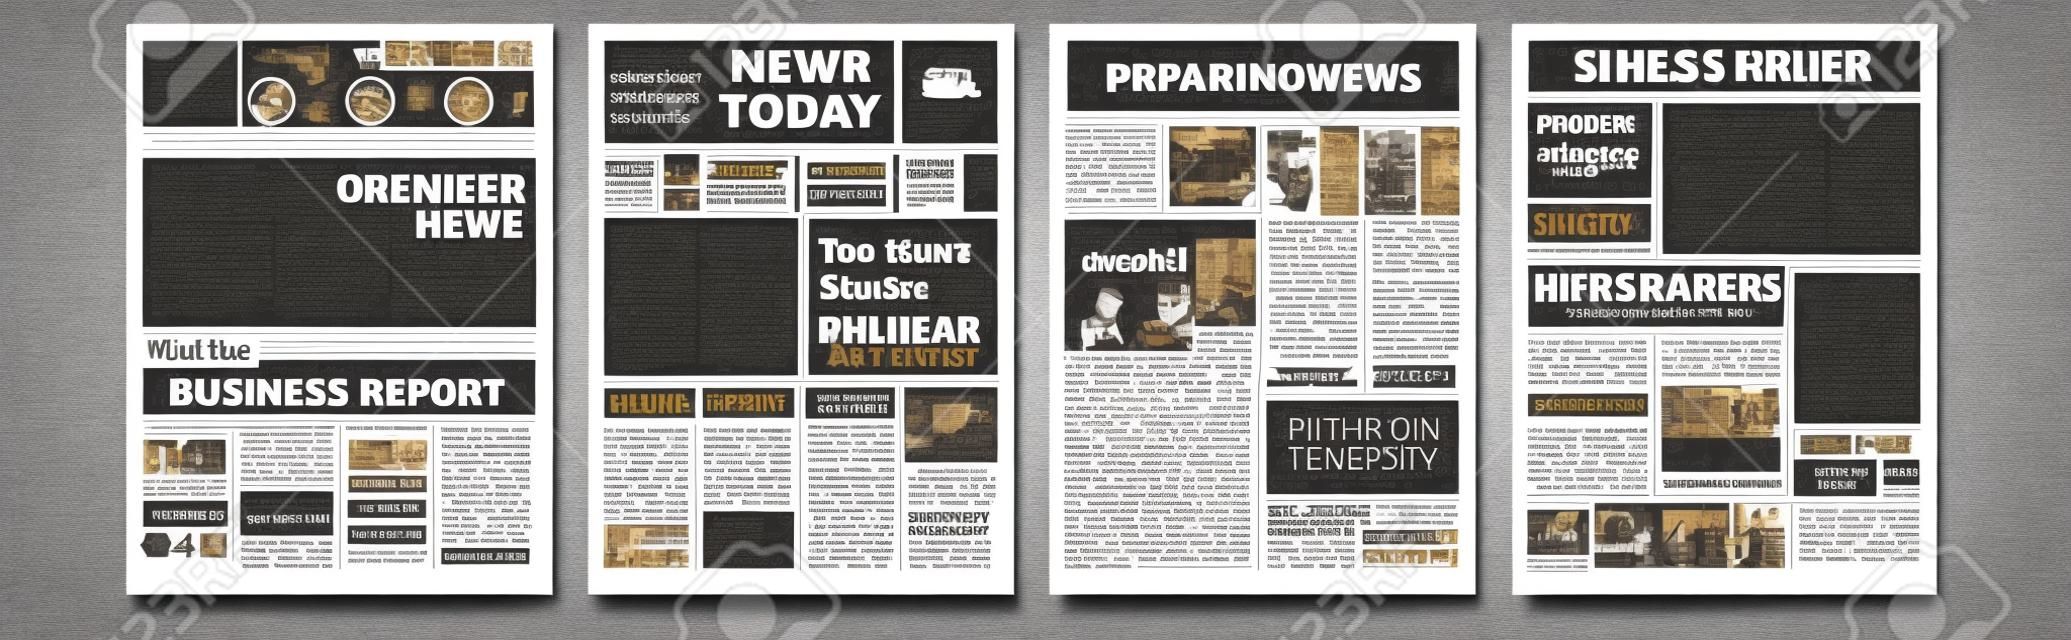 Newspaper Cover Set Vector. With Text Article Column Design. Technology And Business Article. Press Layout. Blank Daily Newspaper. Headline News. Reportage Information. Illustration